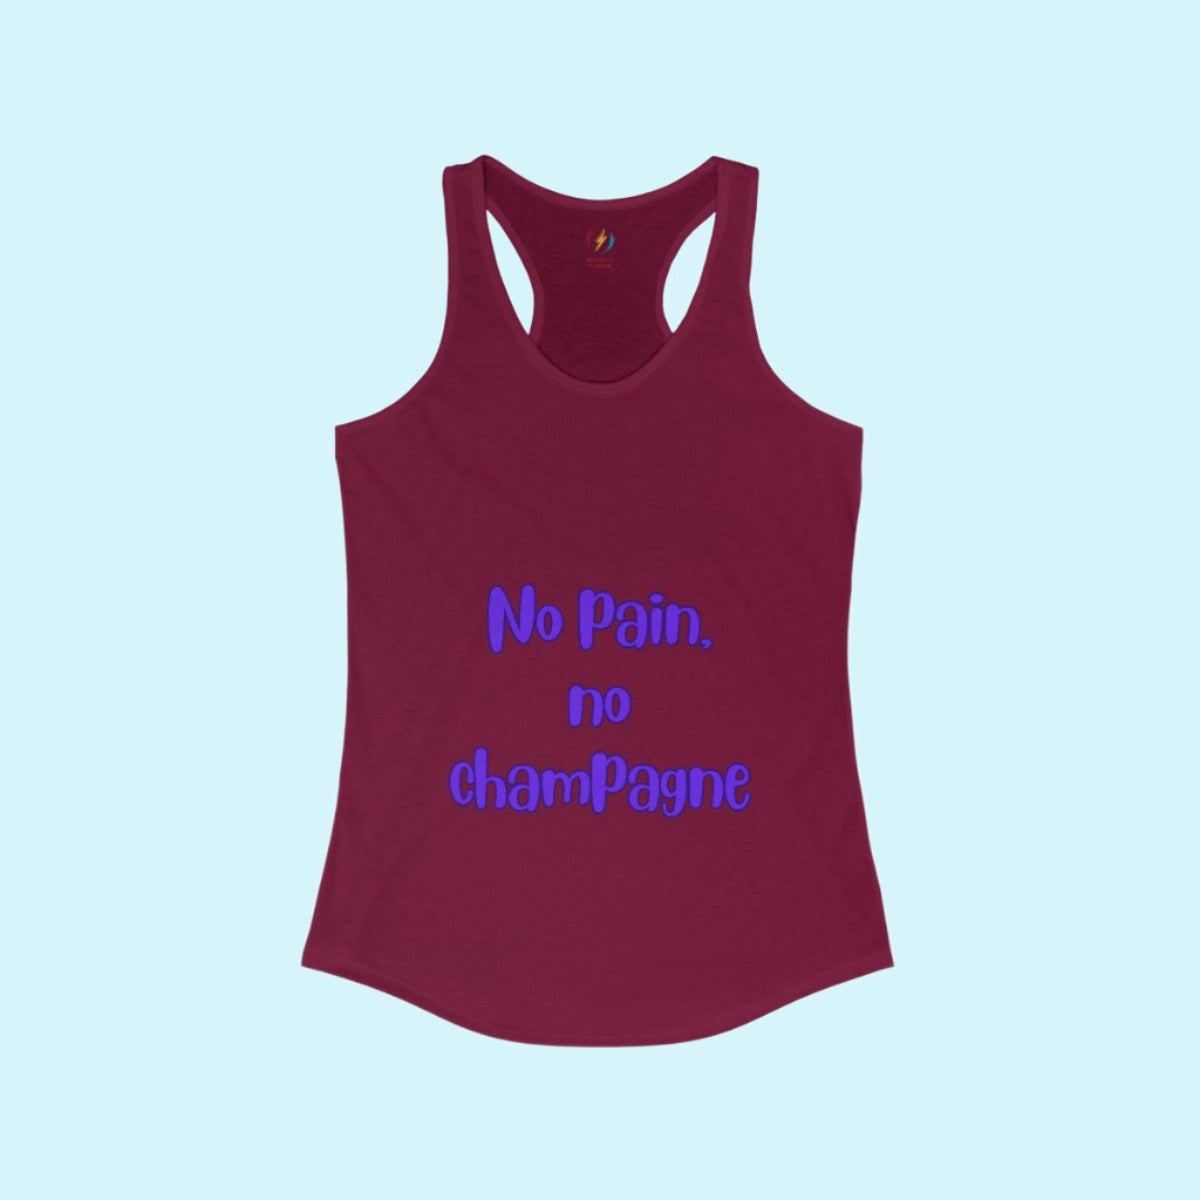 Cardinal Red Women's No Pain No Champagne Performance Racerback Tank Top